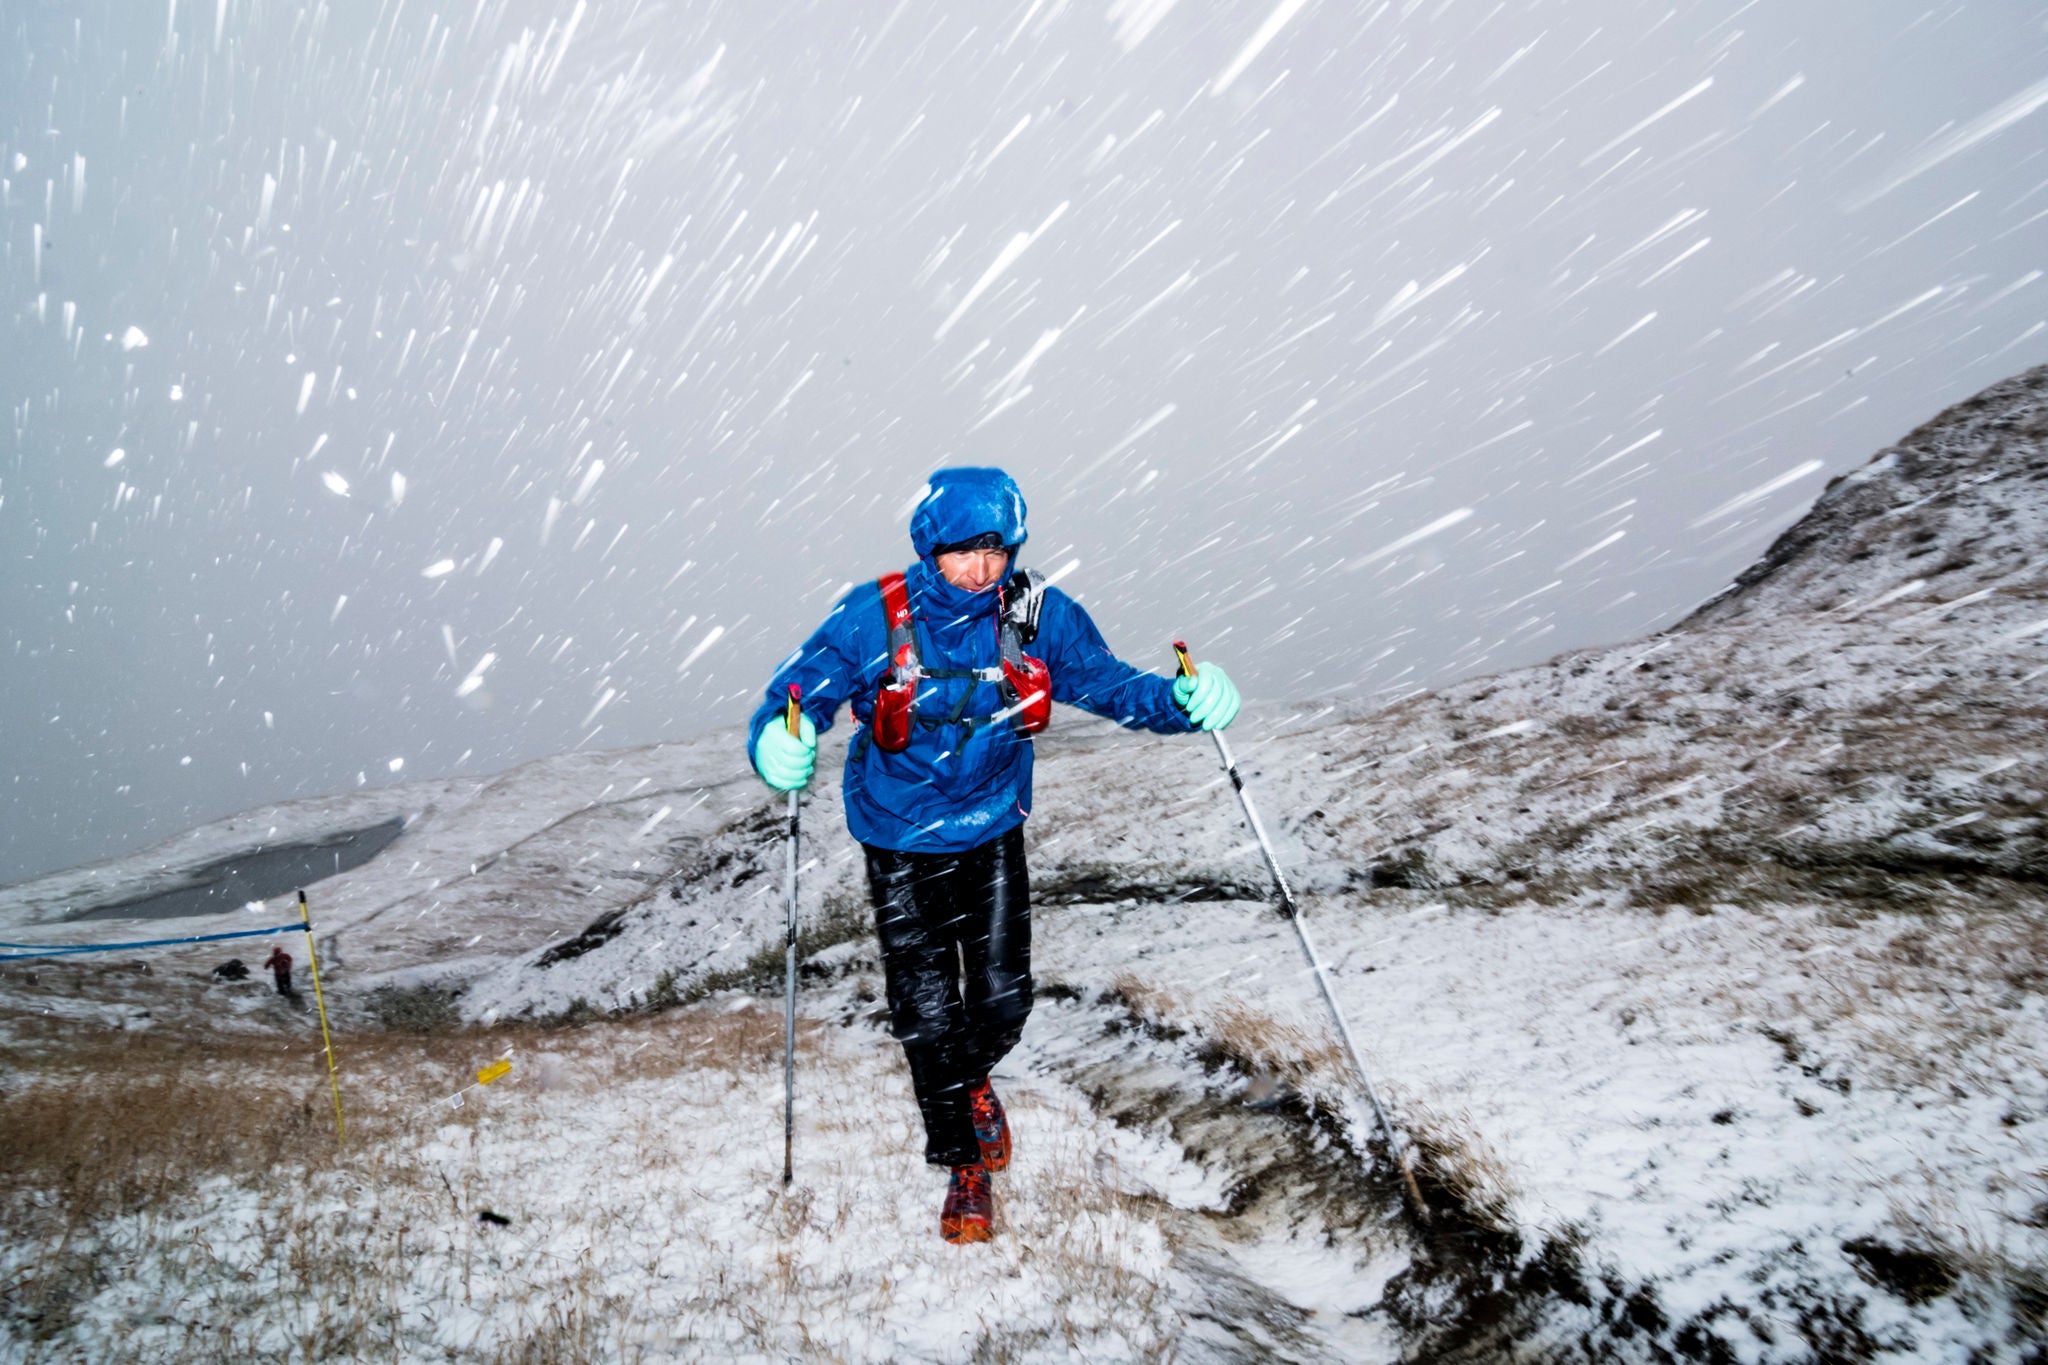 Winter Running tips: What can we do to make running in winter less